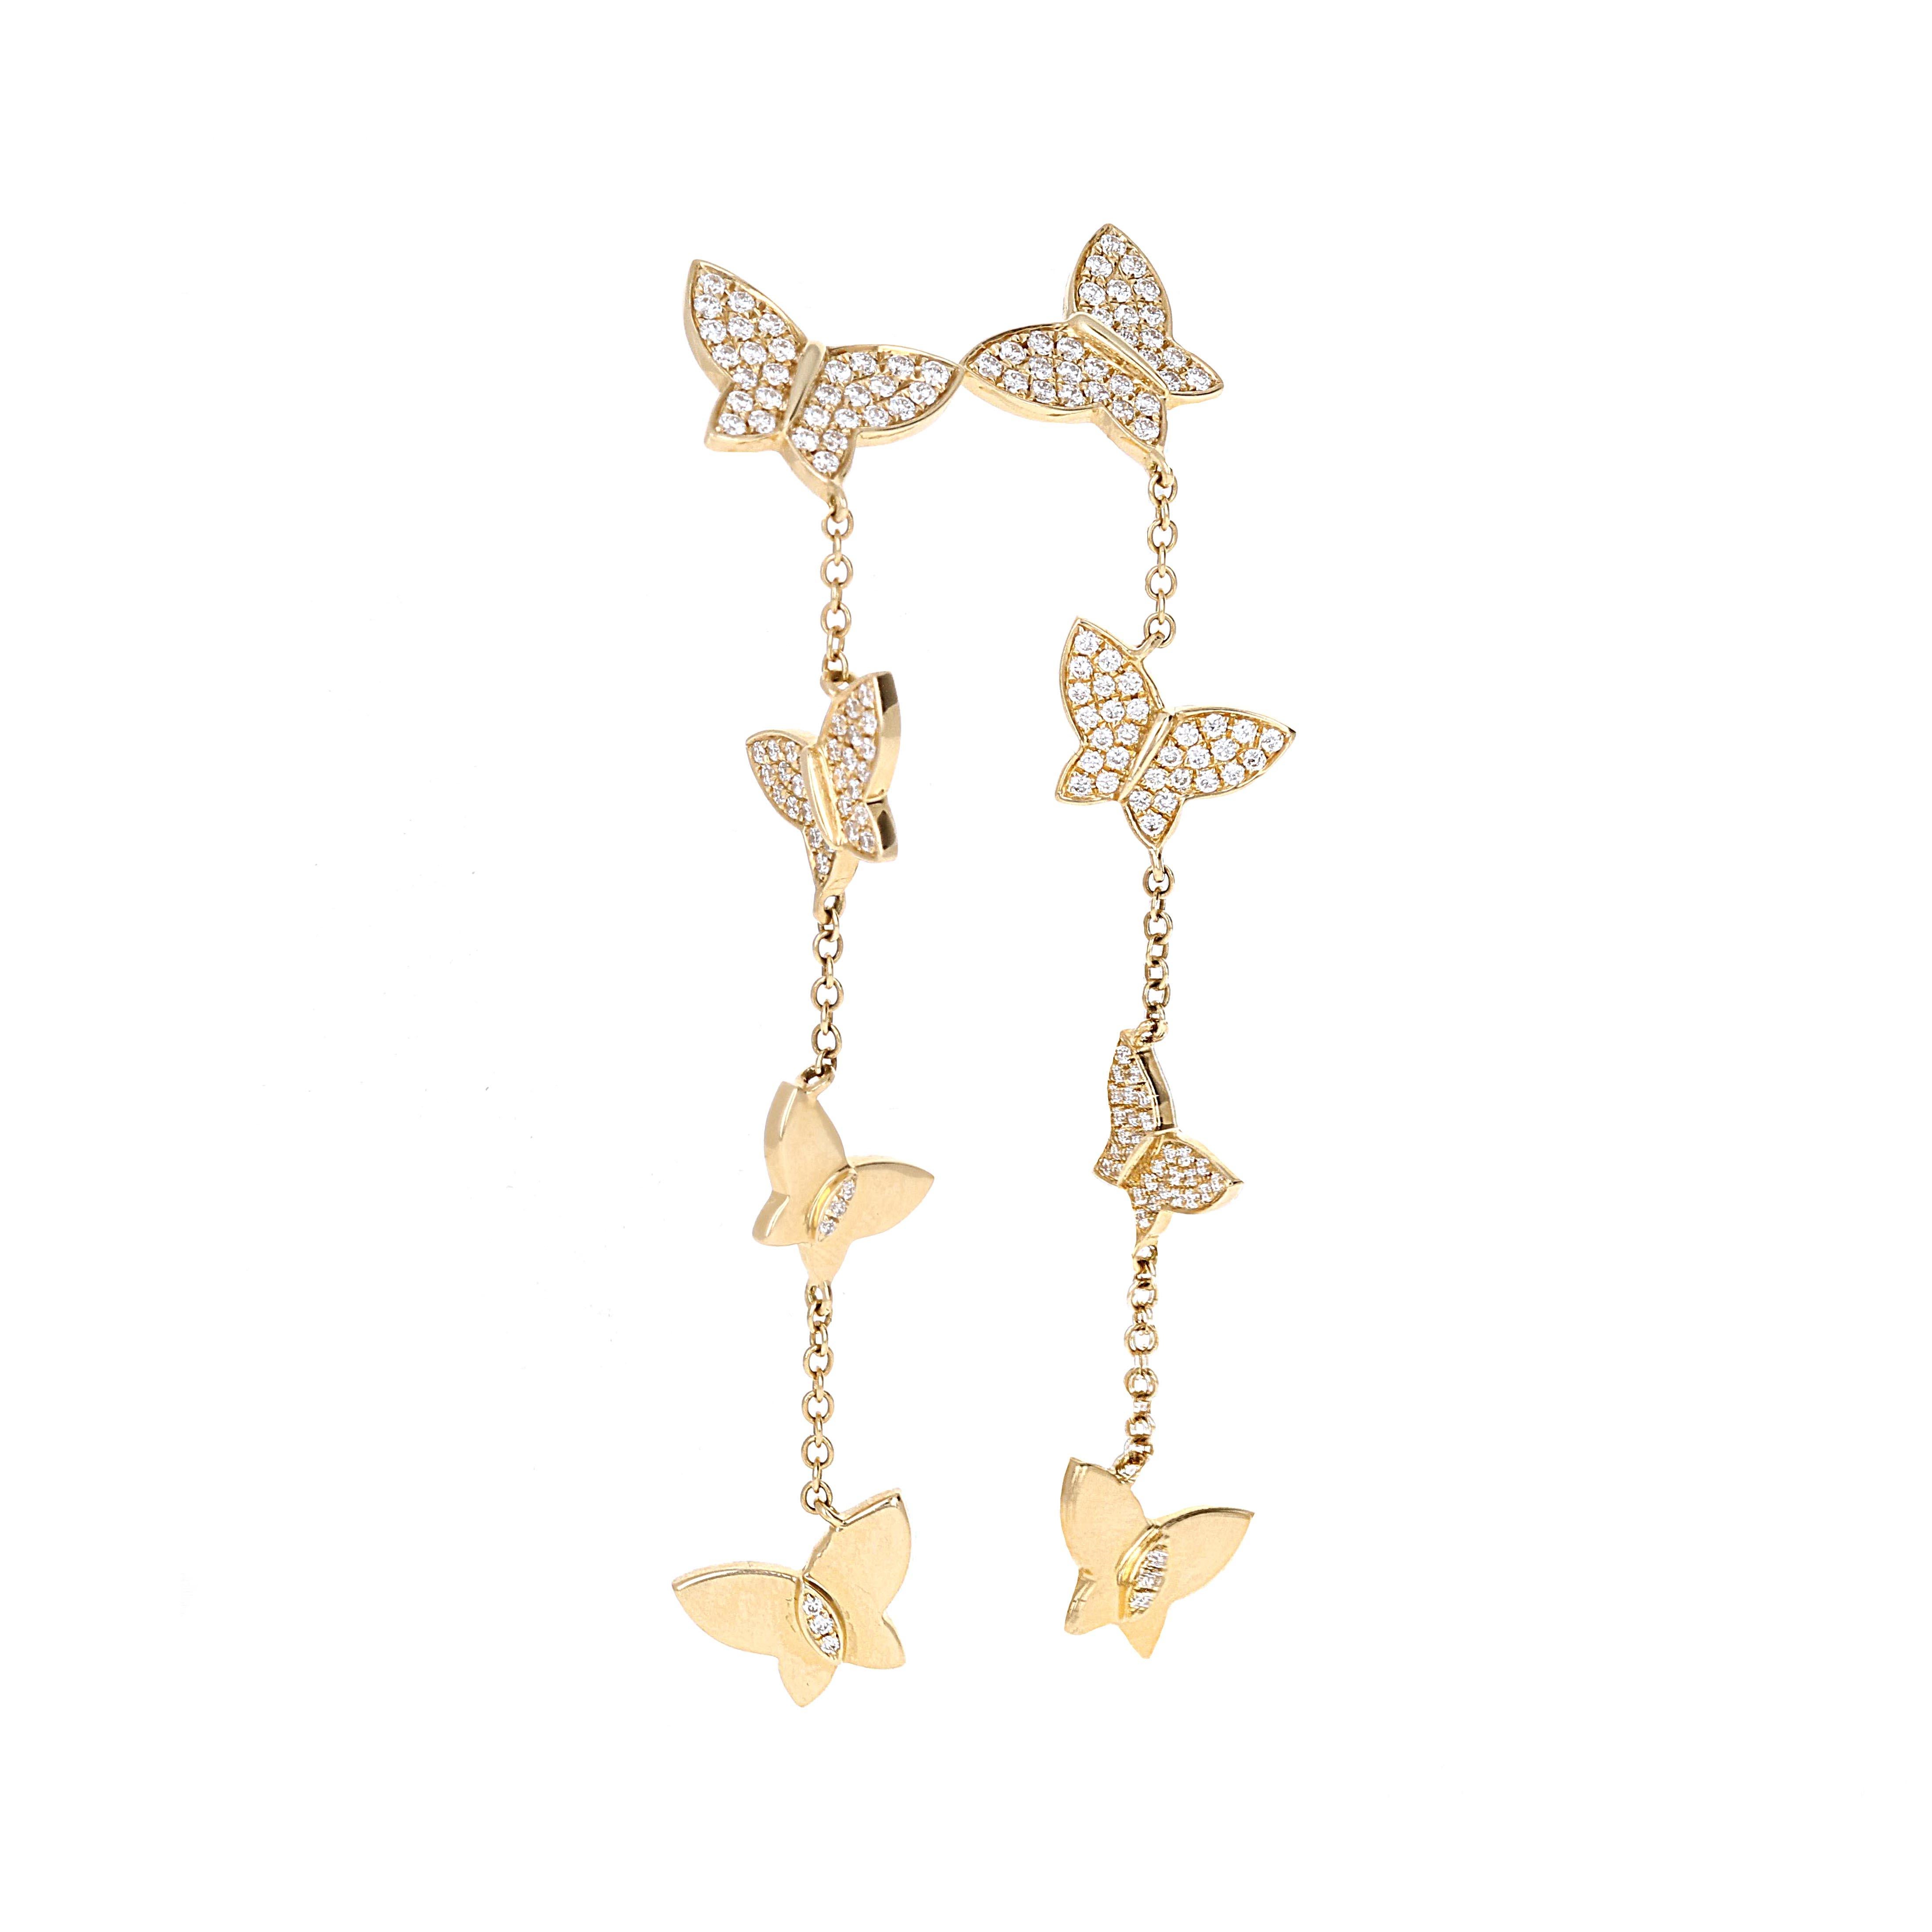 These 18 karat yellow gold diamond dangle earrings are an easy piece to wear. They are earrings you can wear both day and night and ones you can dress up or down. The butterflies are paved on the front giving them that extra sparkle when wearing